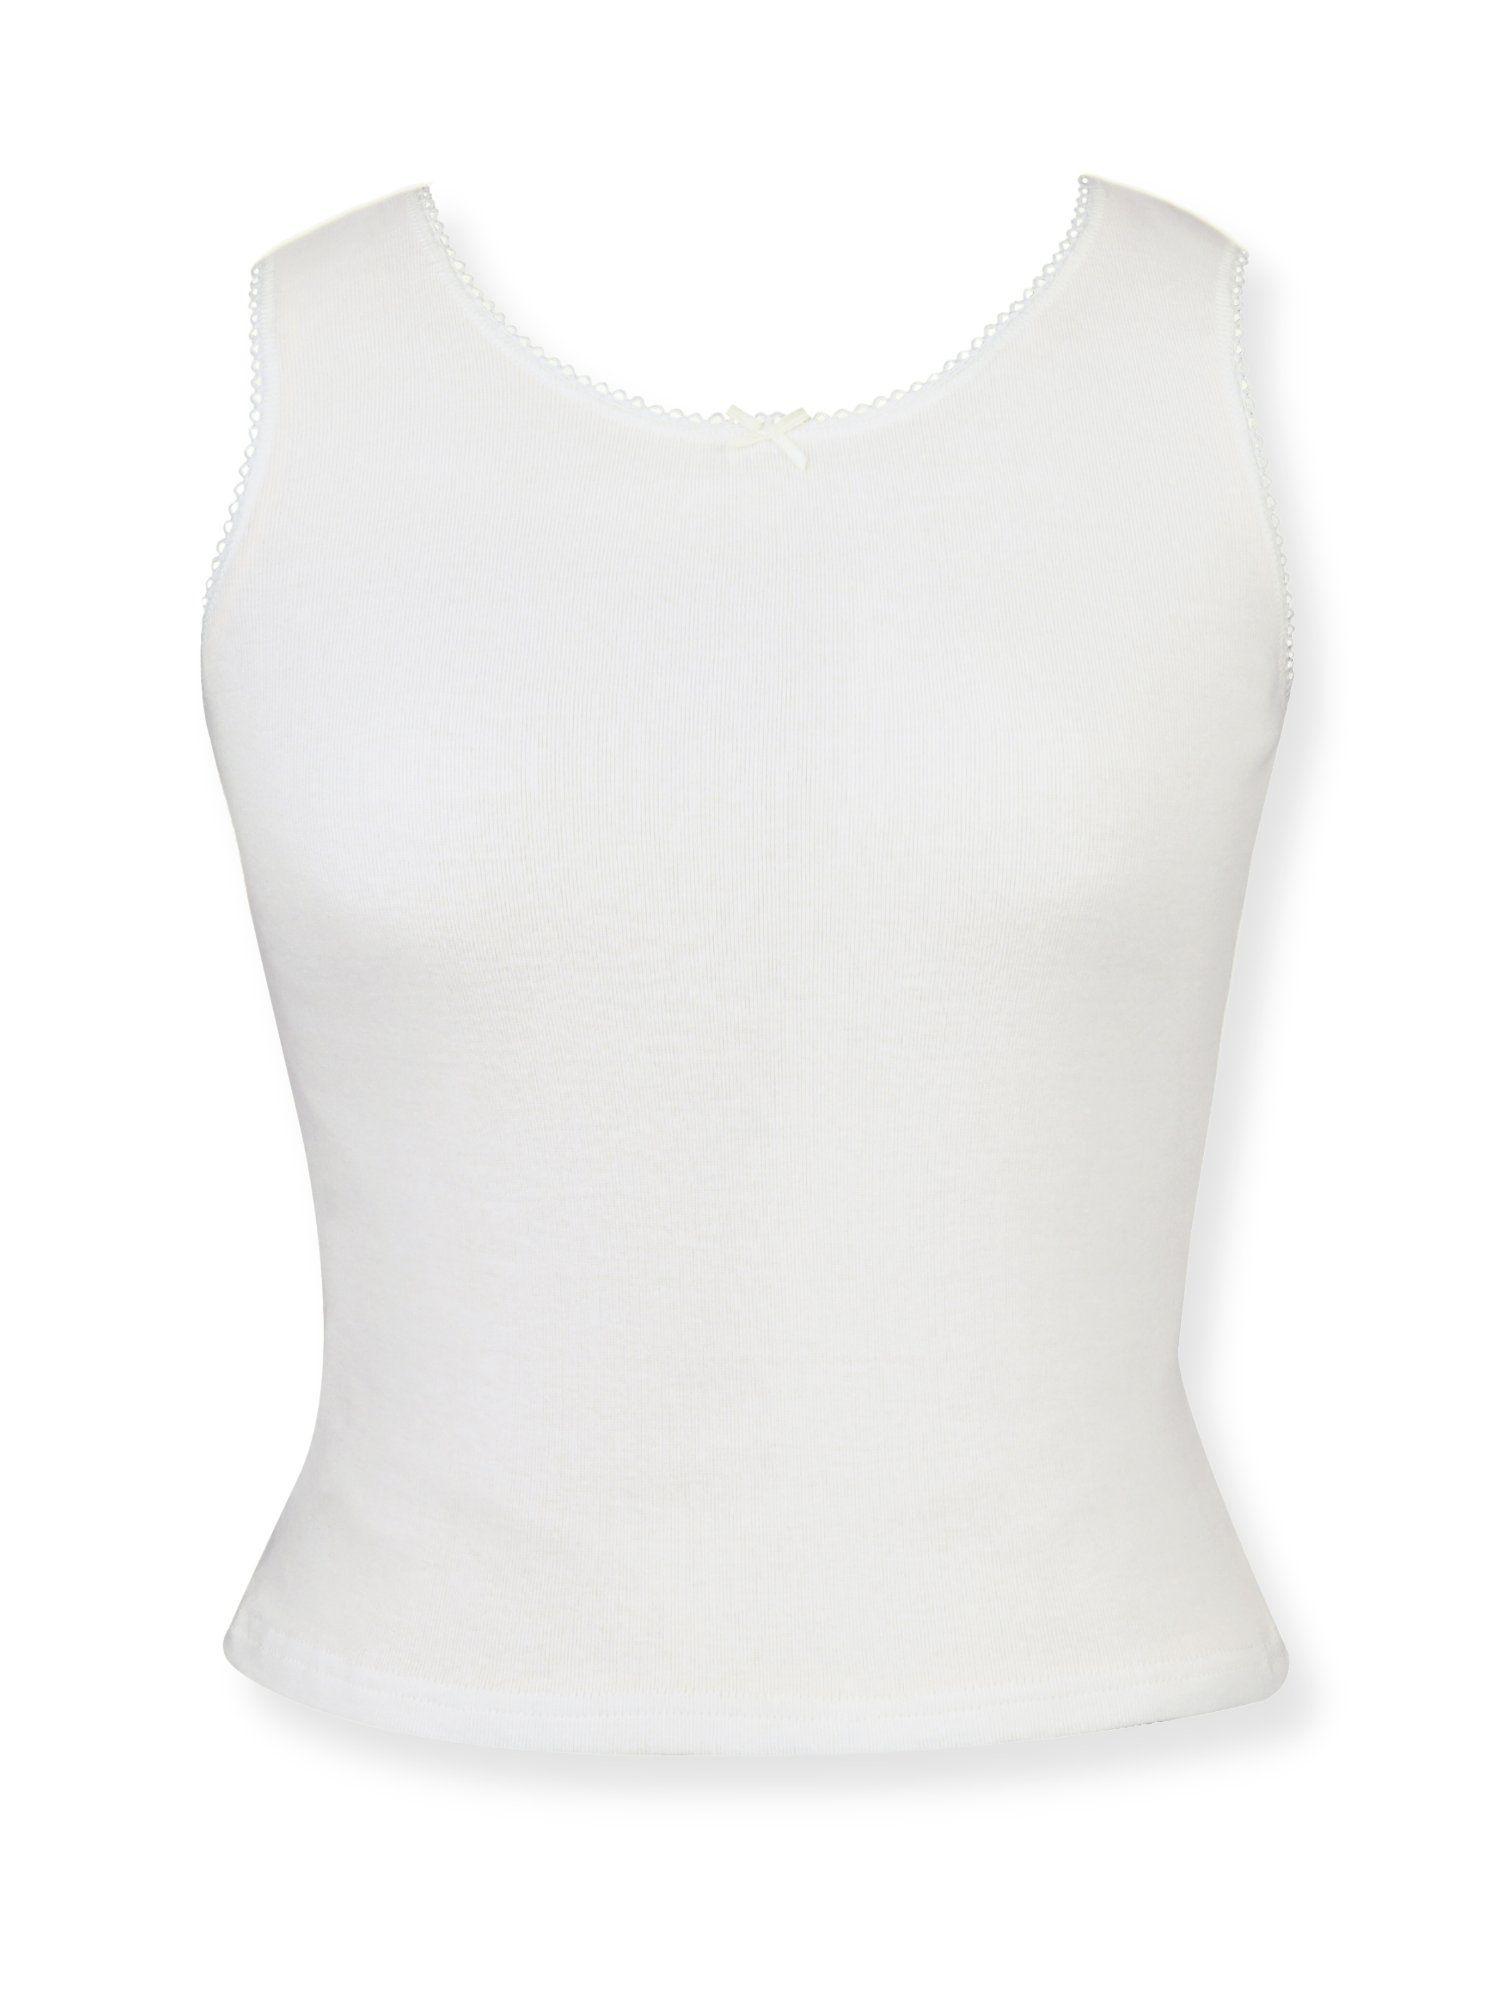 dchica-girls-white-full-coverage-broad-strap-cotton-camisole-pack-of-1